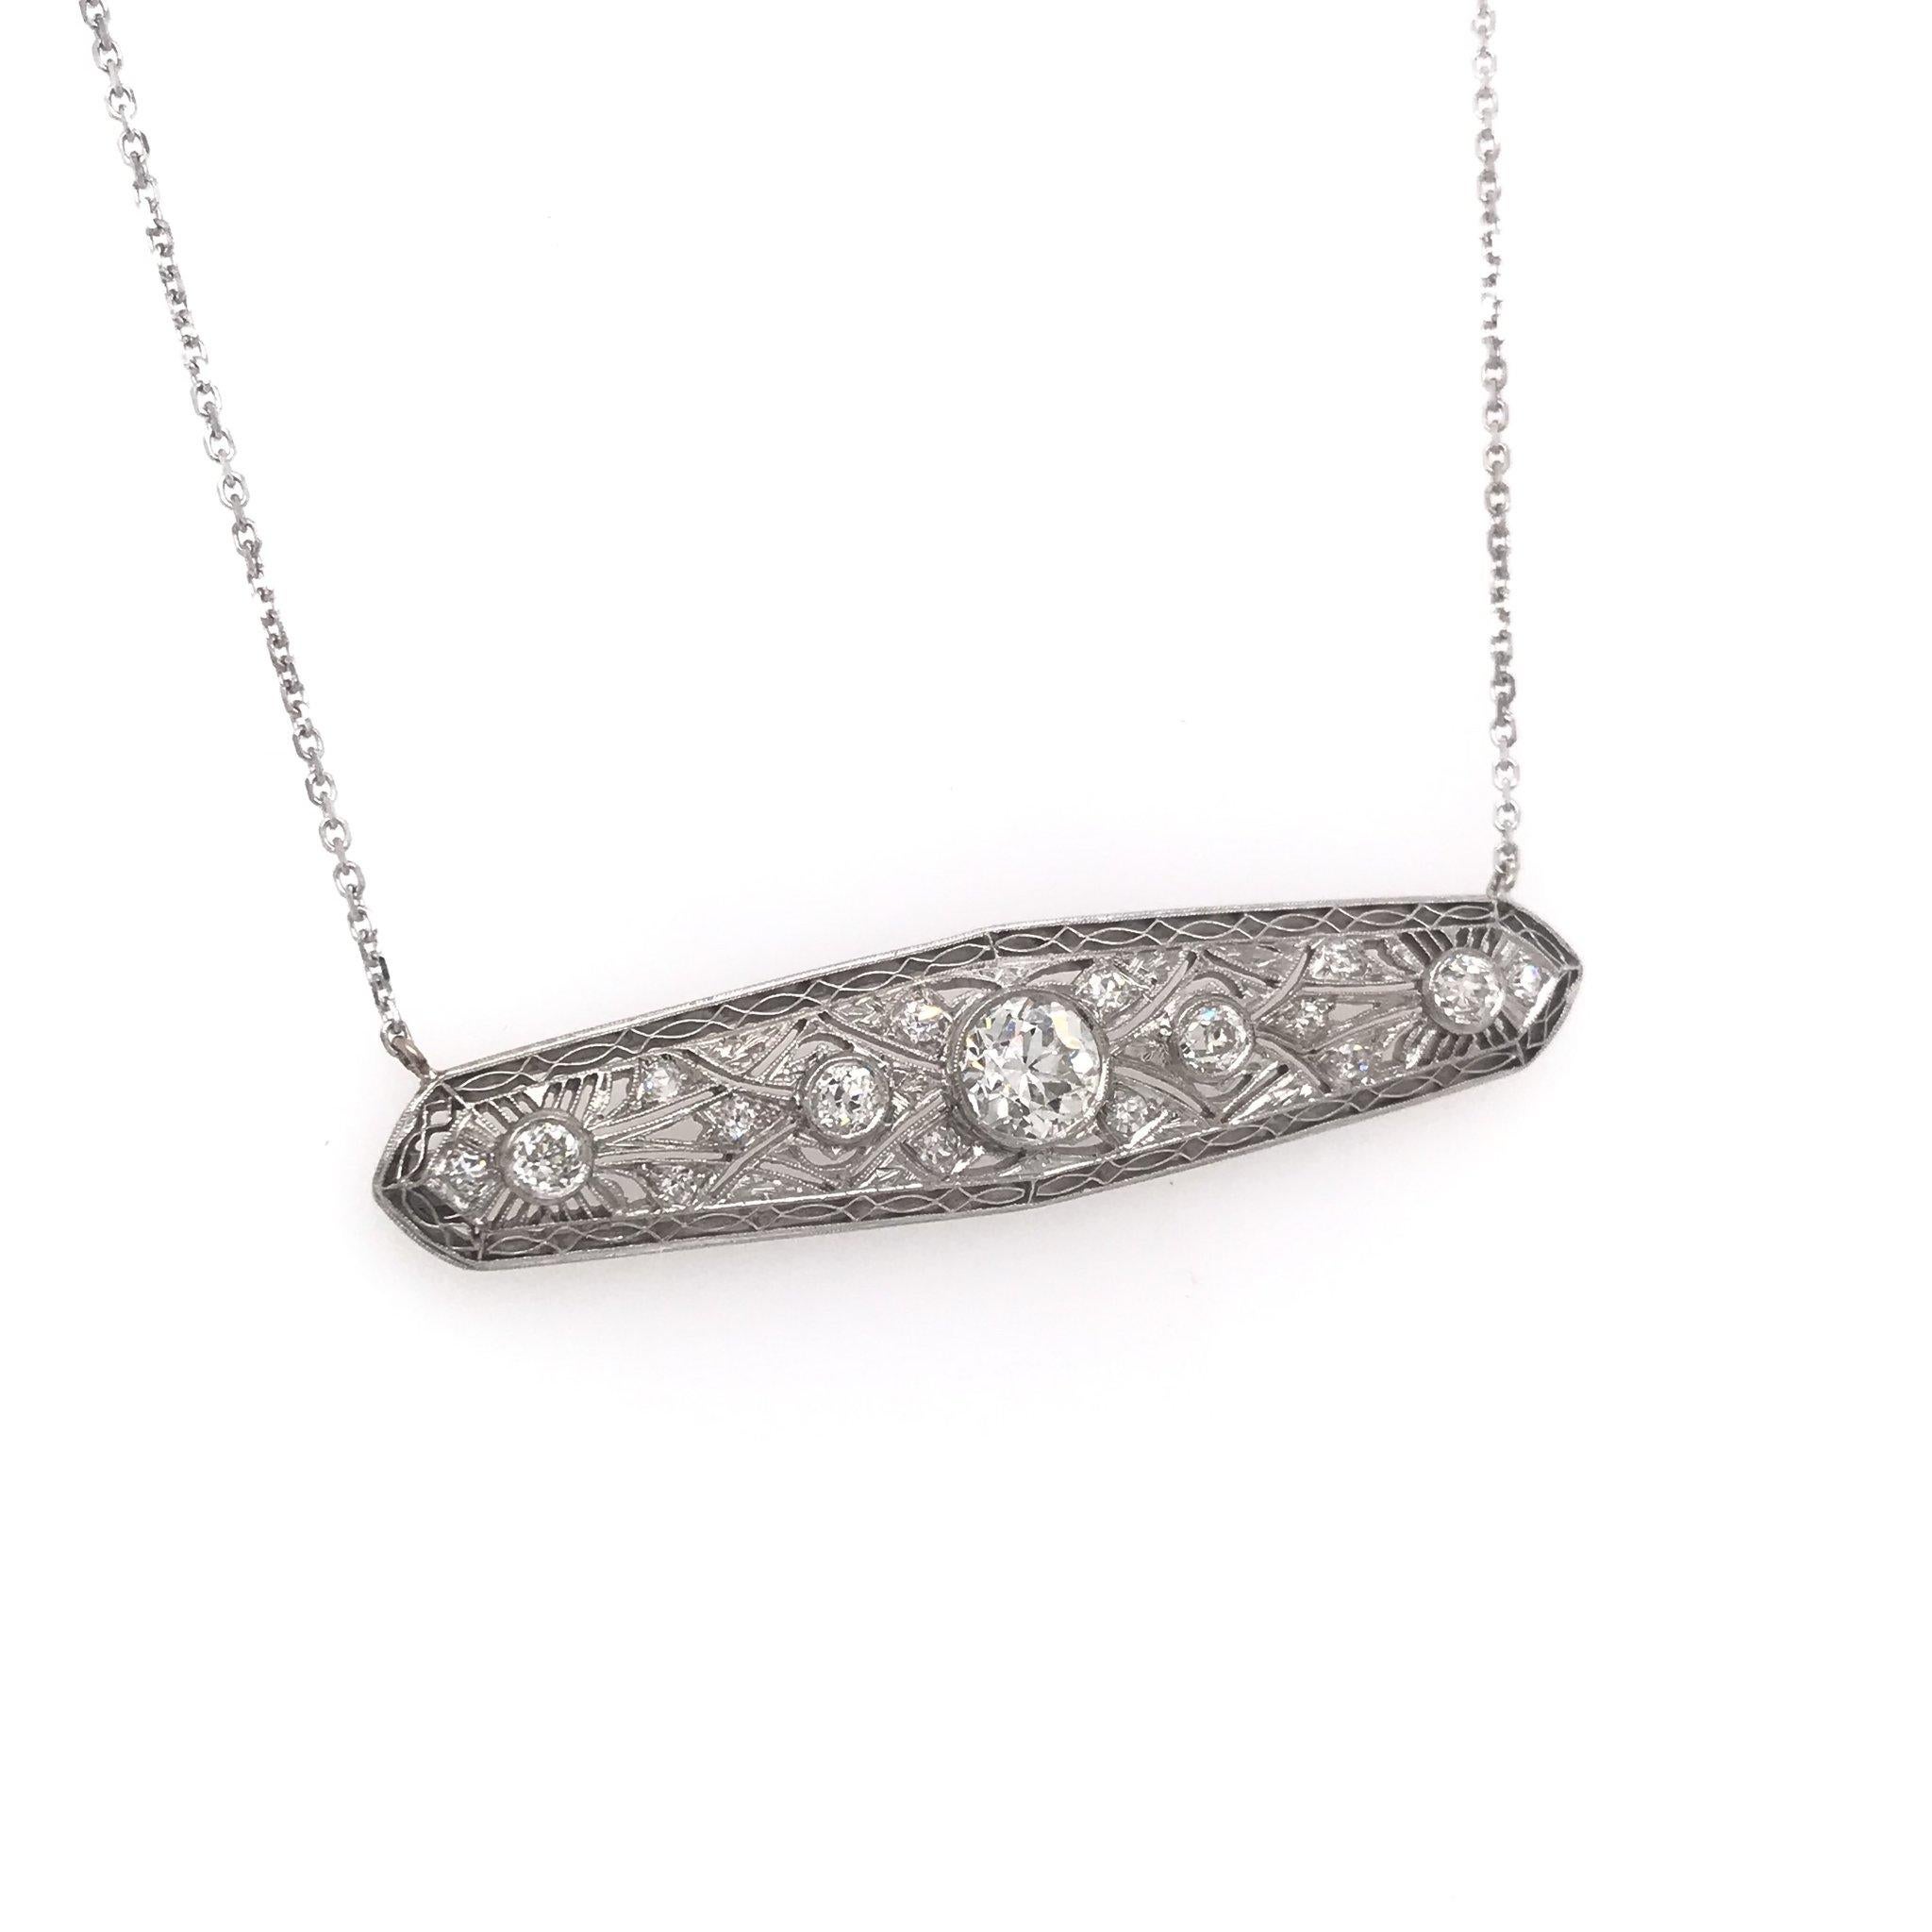 This piece is an antique revision made from reclaimed antique materials. This necklace was originally an antique platinum filigree brooch, handcrafted sometime during the Edwardian design period ( 1900-1920 ). The platinum pendant features a